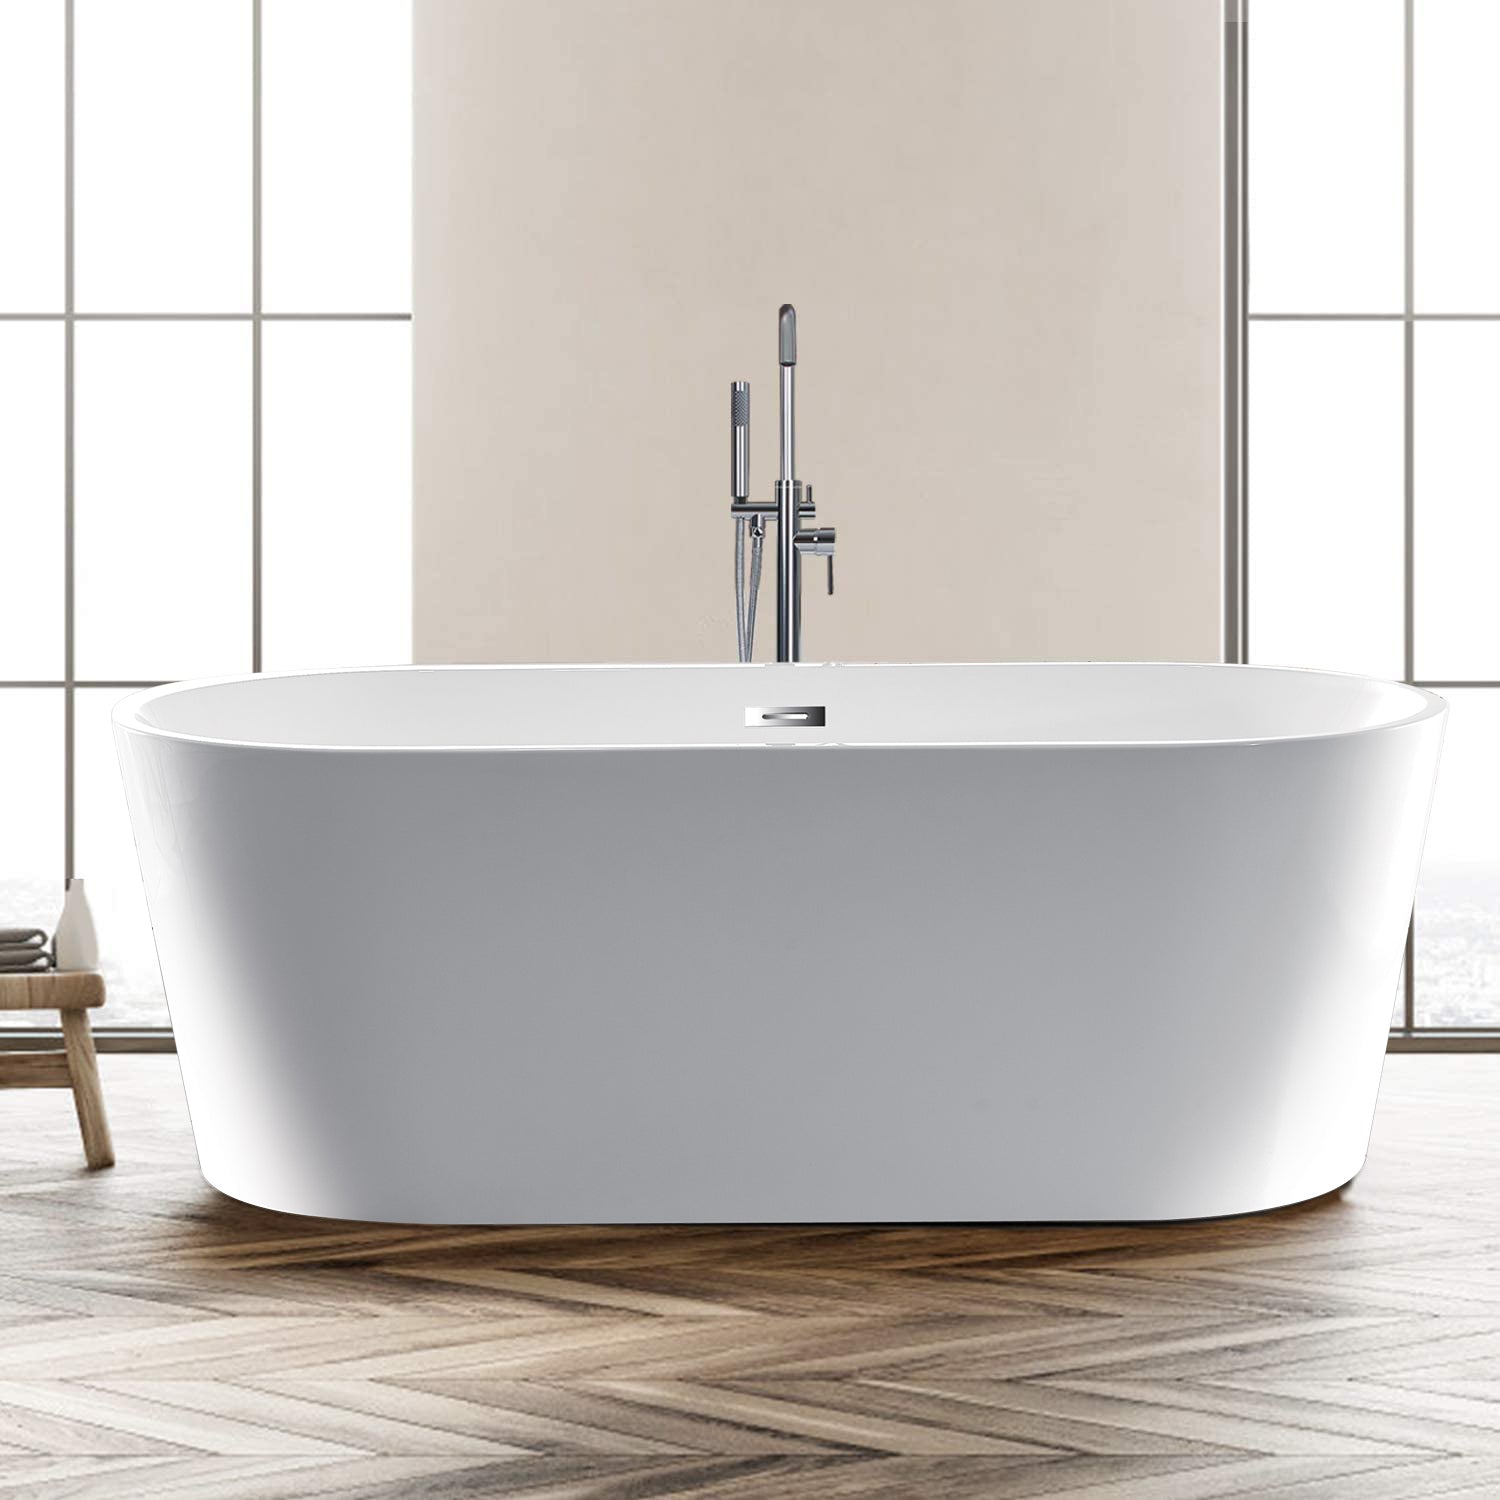 67" 100% Acrylic Freestanding Bathtub Contemporary Soaking Tub with Brushed Nickel Overflow and Drain-Boyel Living